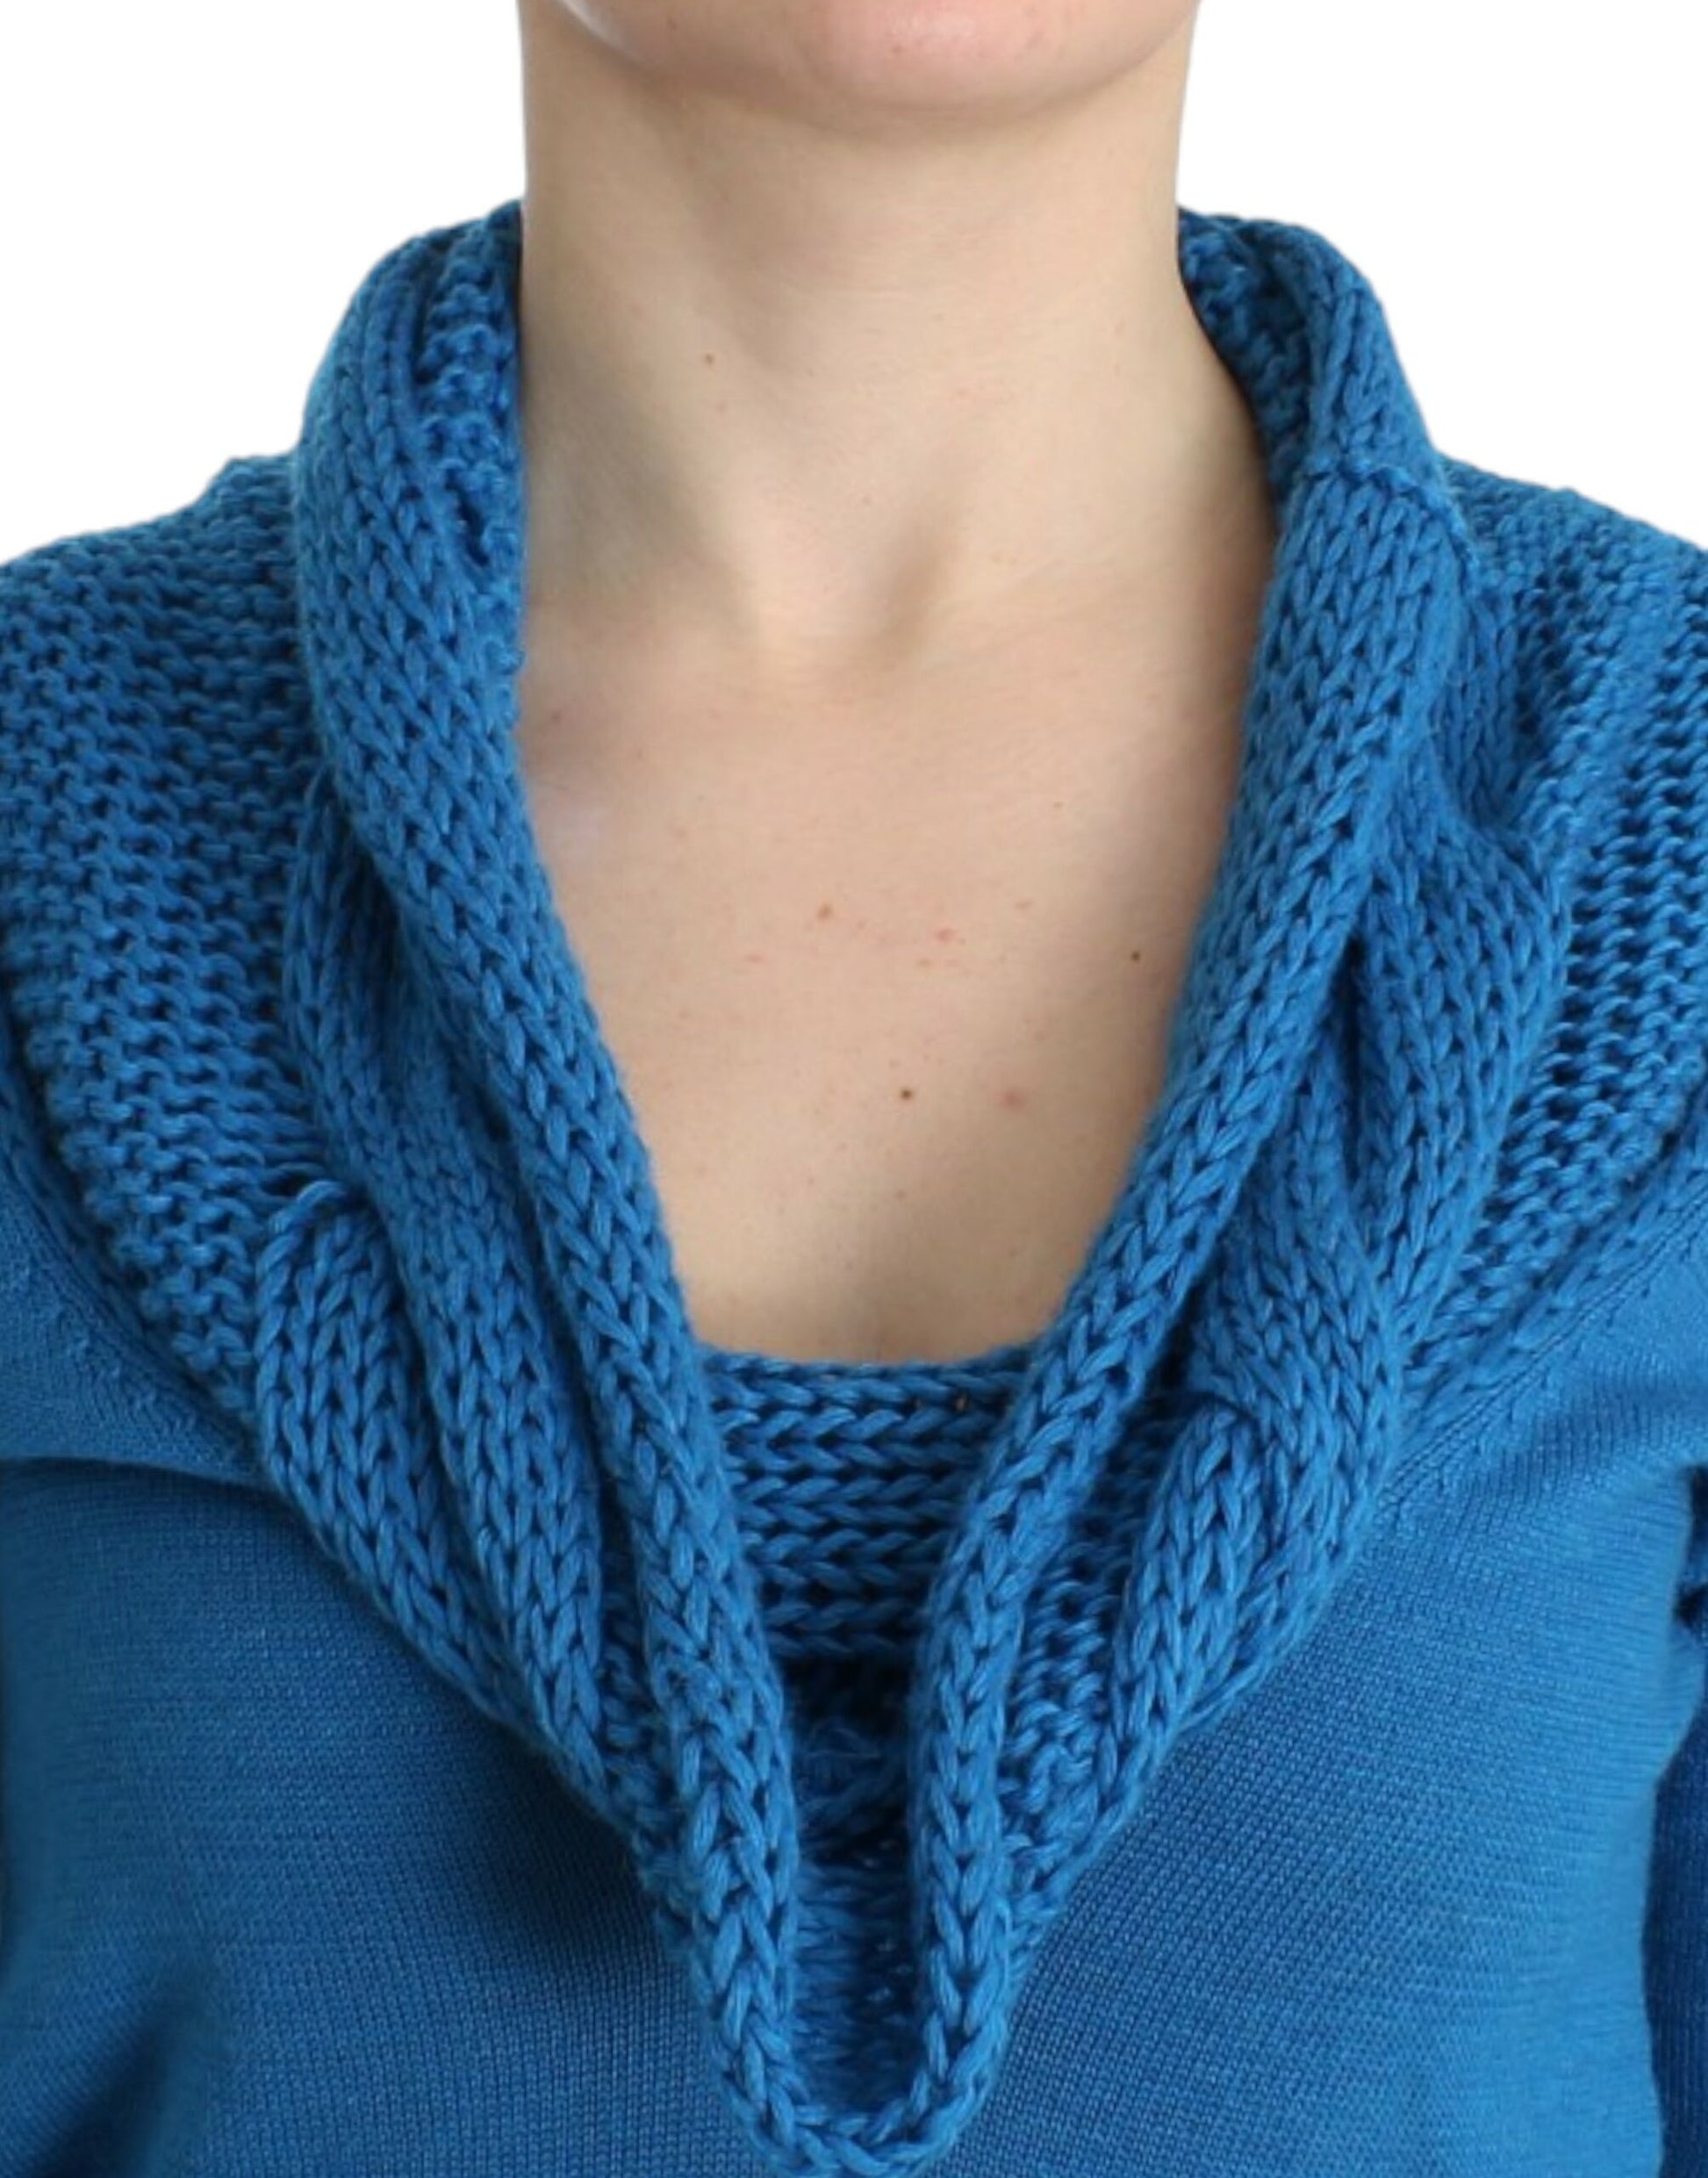 Chic Blue Scoop Neck Knit Sweater